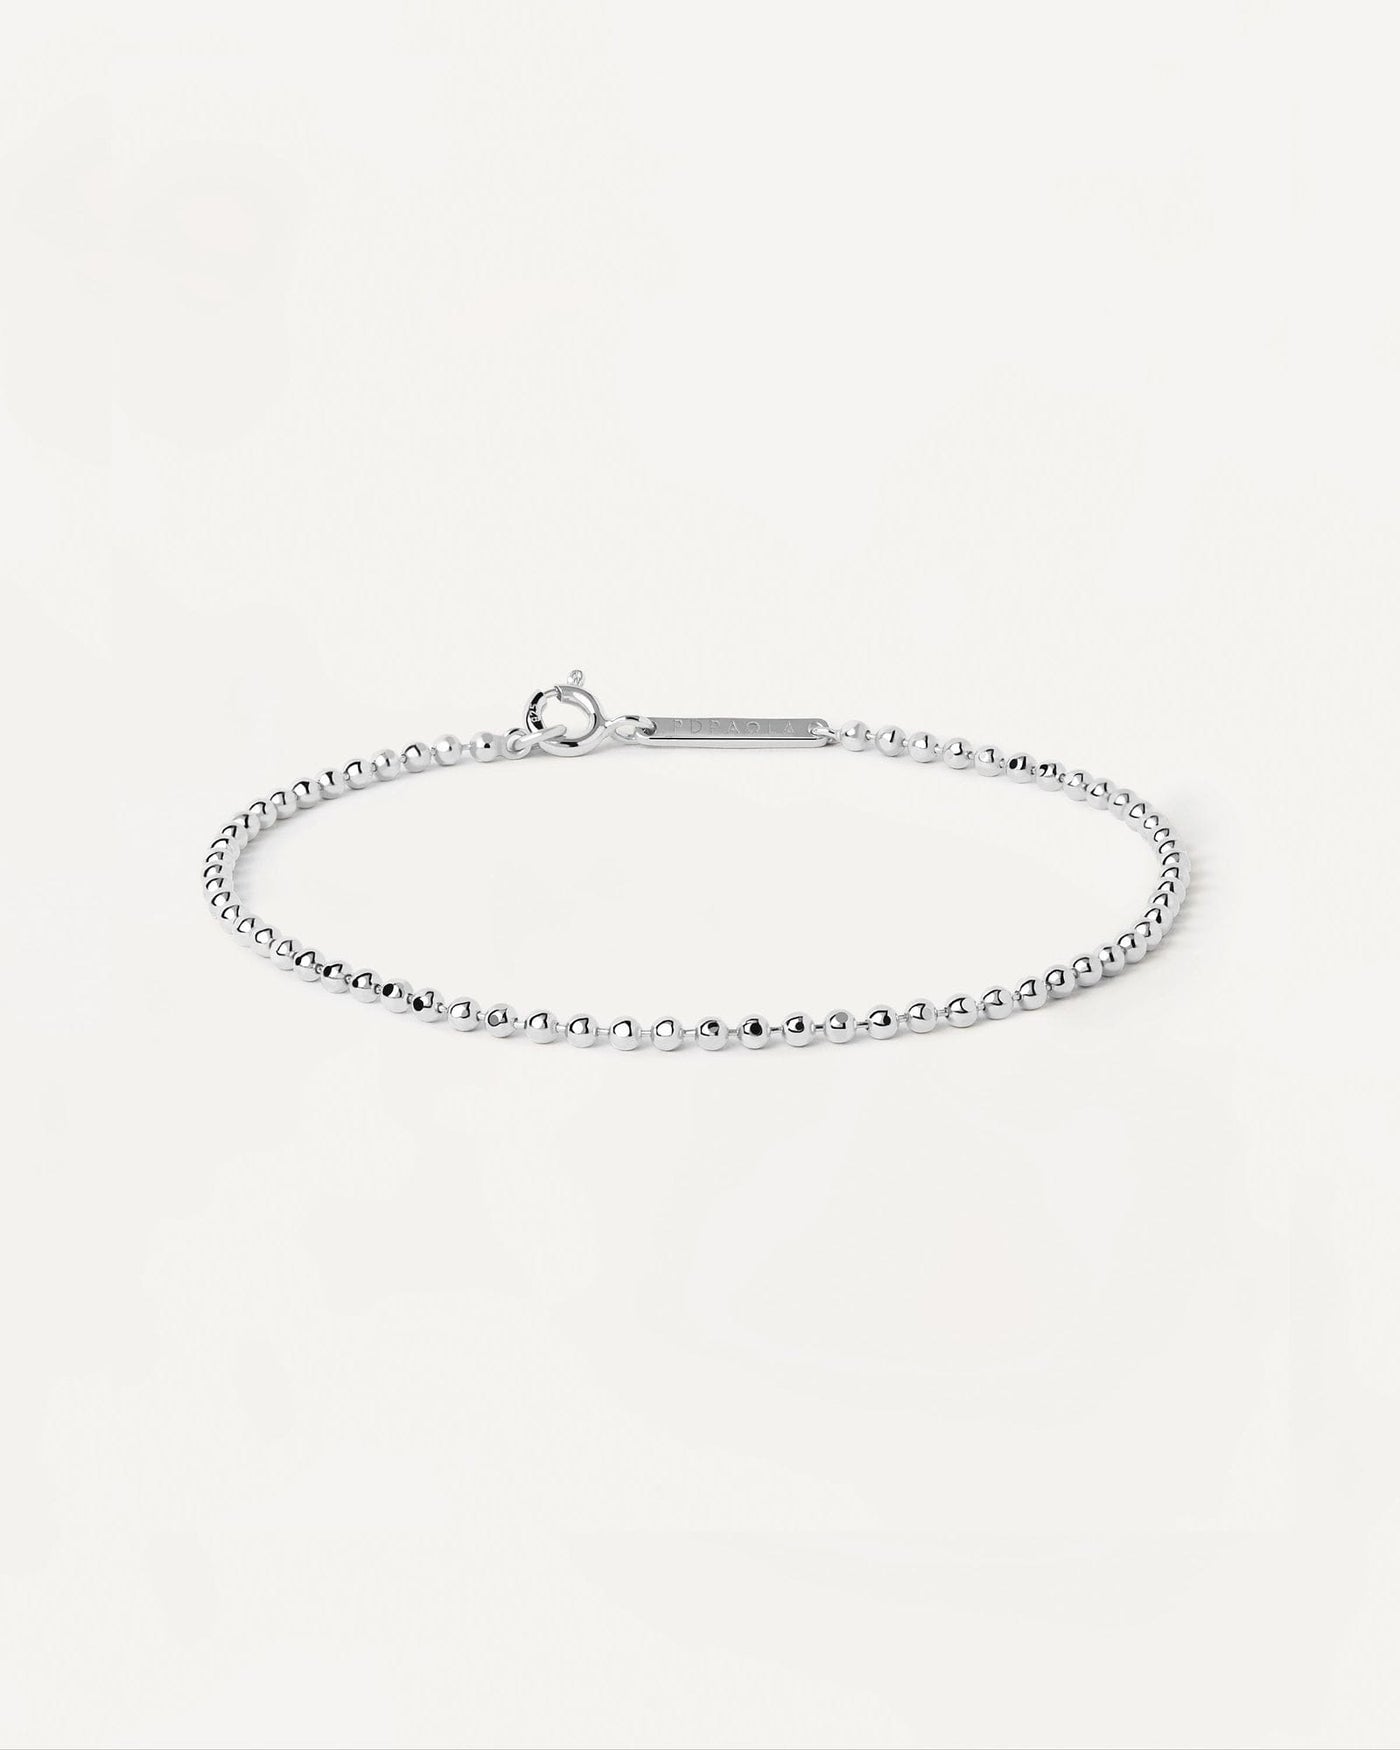 2024 Selection | Ball Chain Silver Bracelet. Ball-textured chain bracelet in plain sterling silver. Get the latest arrival from PDPAOLA. Place your order safely and get this Best Seller. Free Shipping.